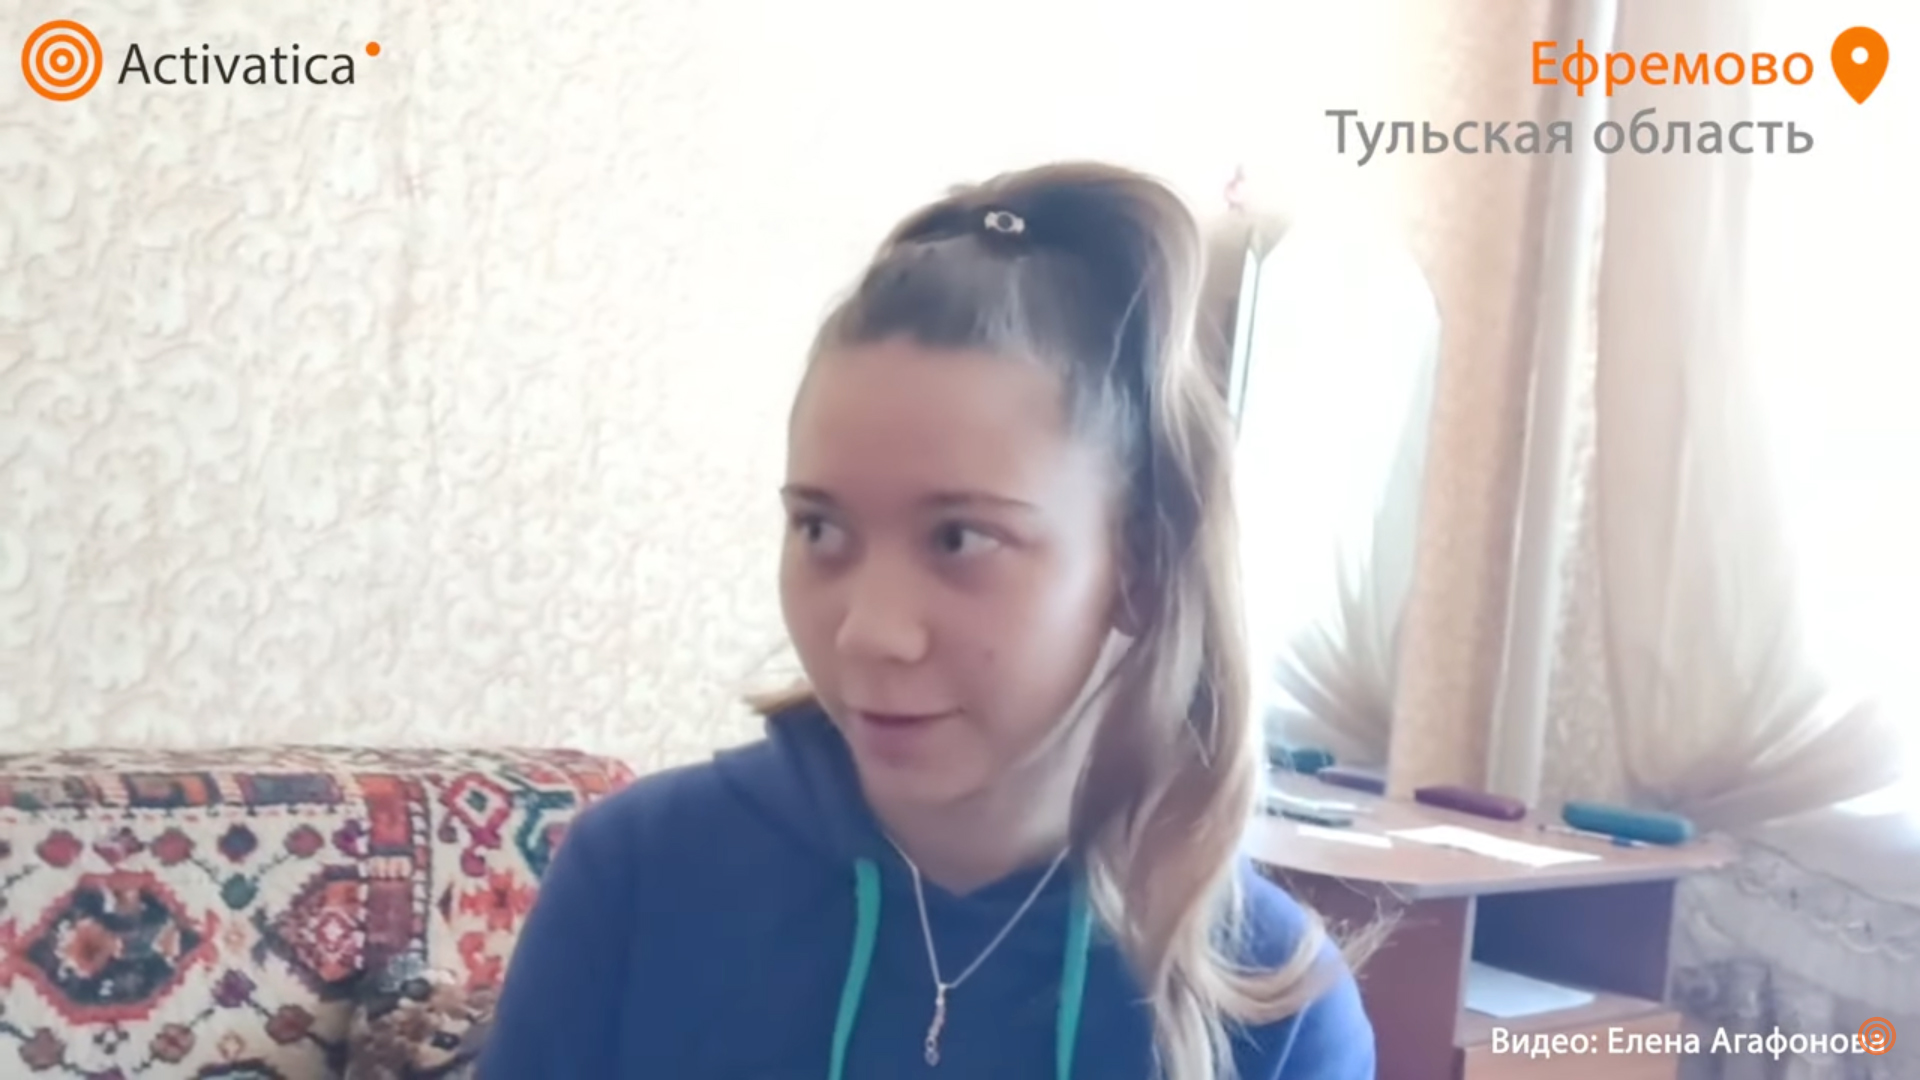 A screengrab of Masha Moskalyova, 12, describing the police search of her home in Russia's Tula region to Activatica, an online portal supporting grassroots activism in the country.